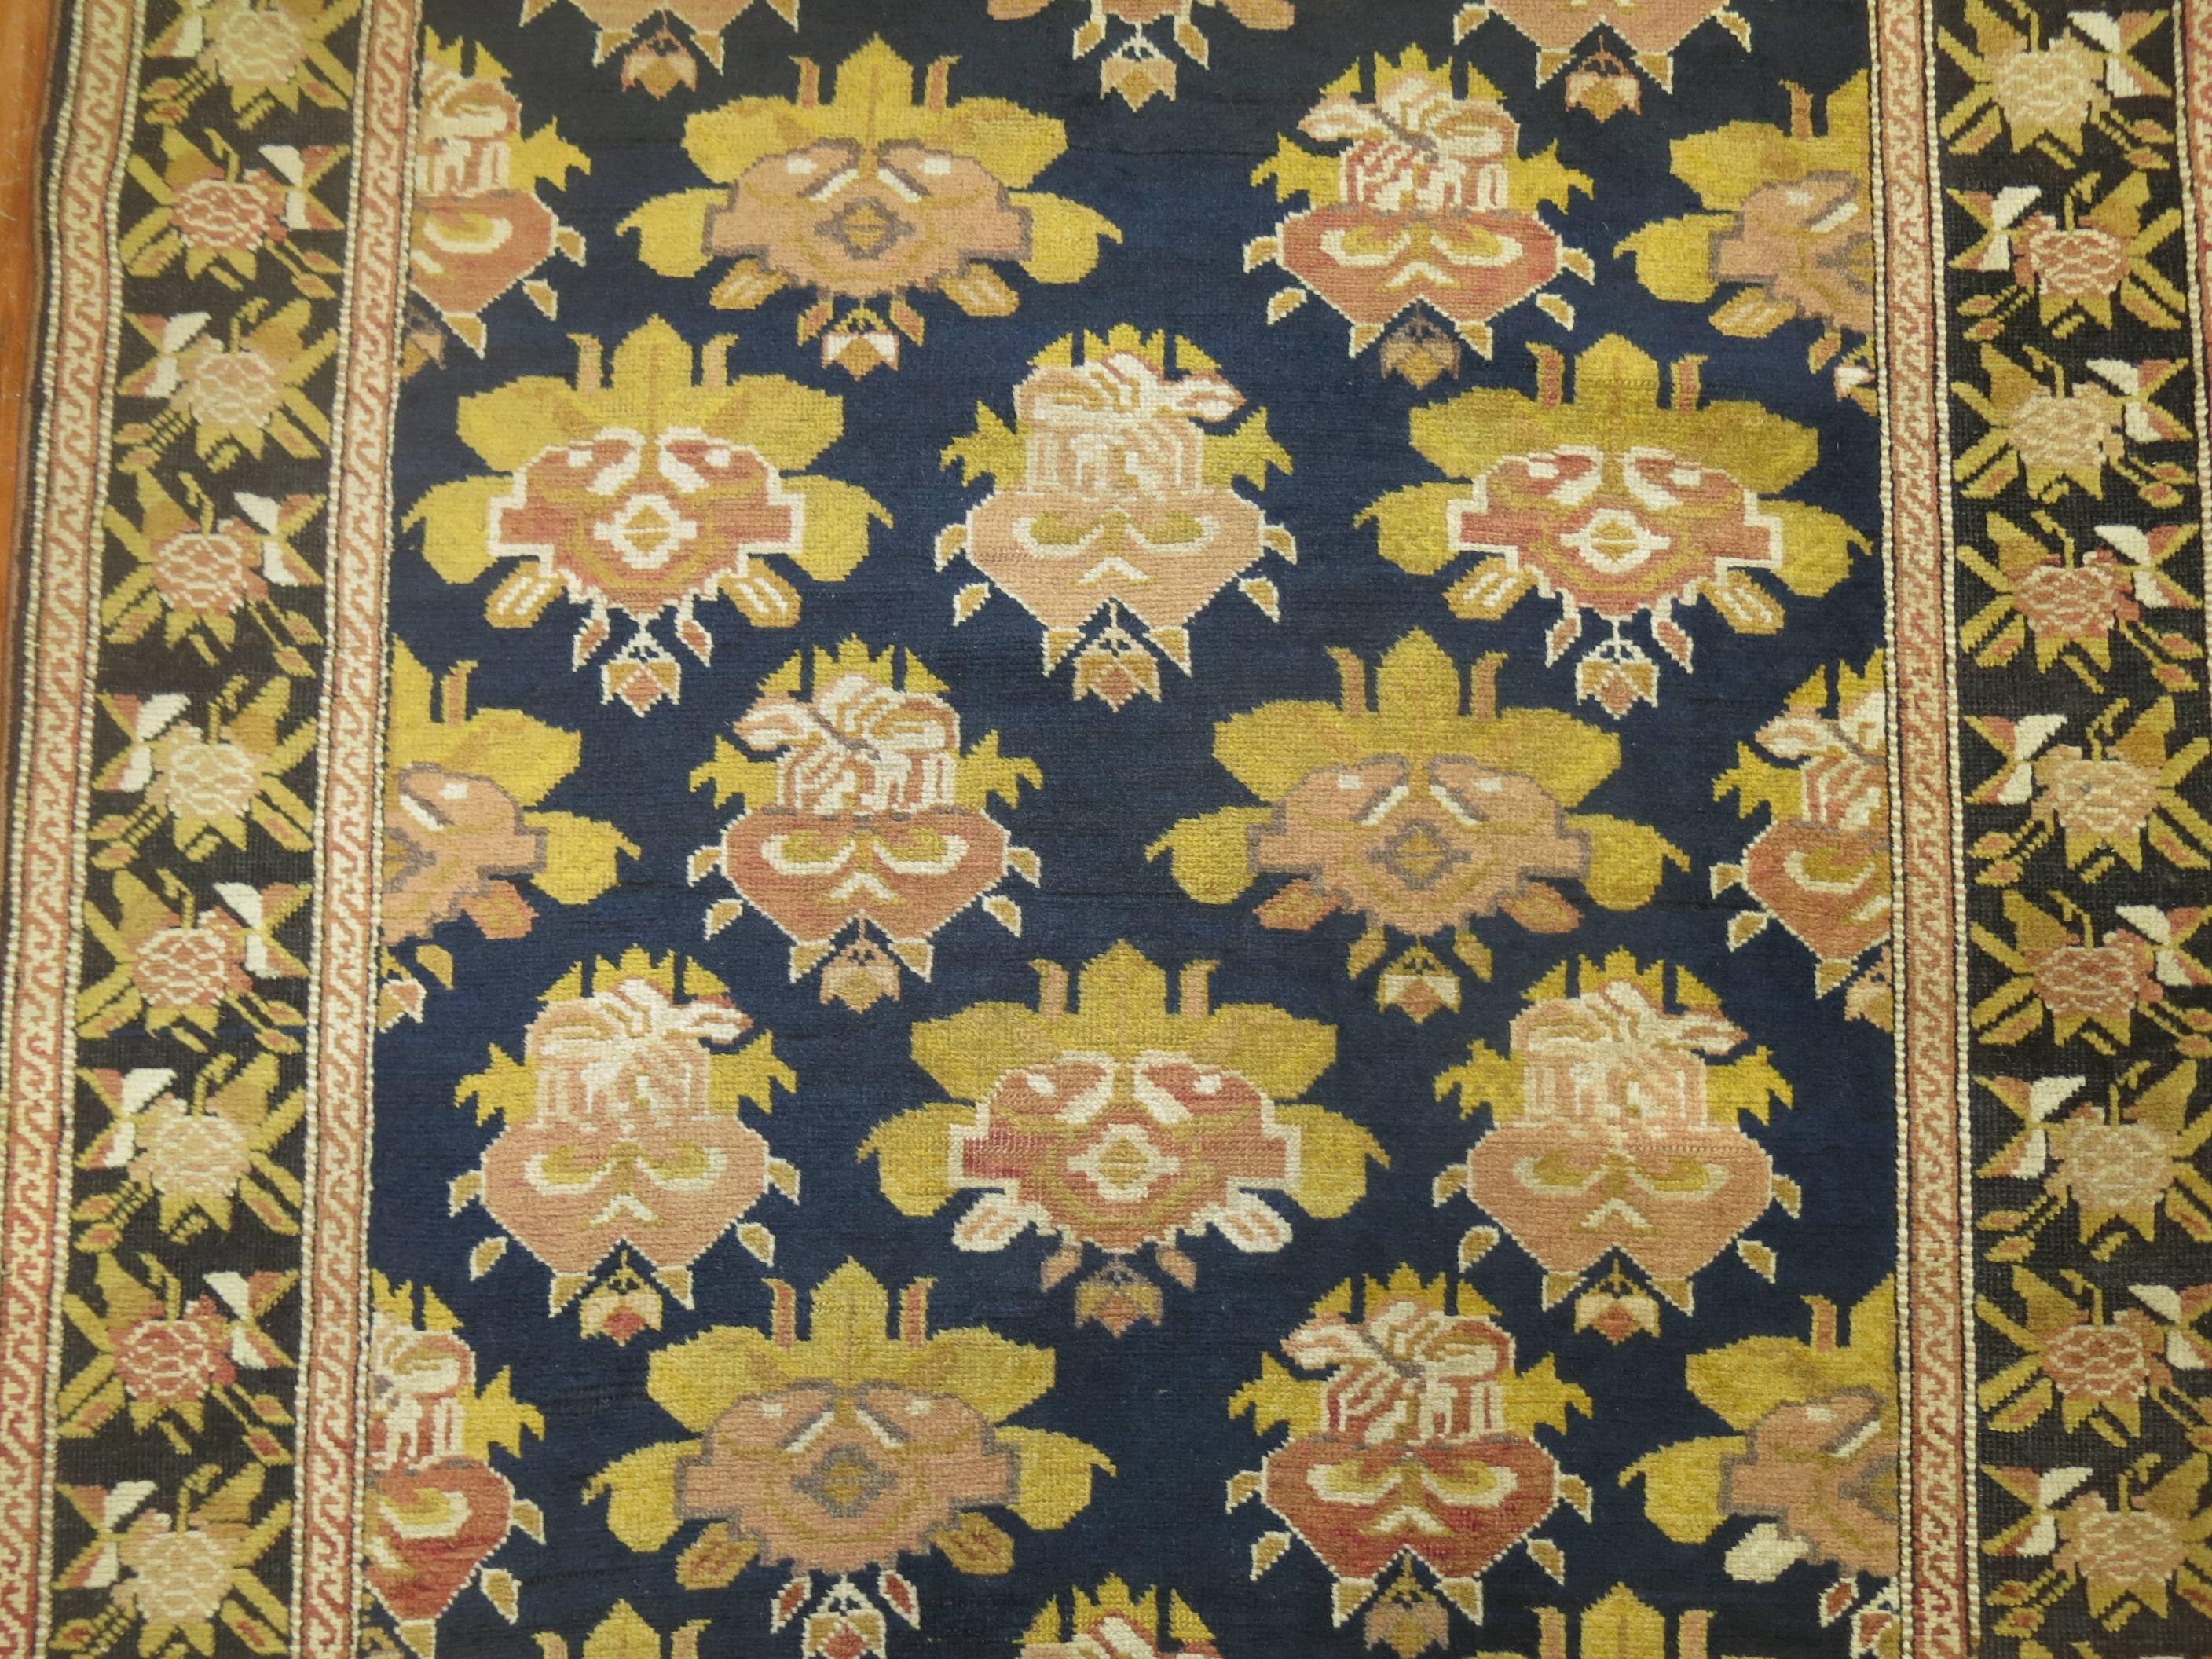 Greco Roman Early 20th Century Floral Long Antique Russian Karabagh Runner For Sale